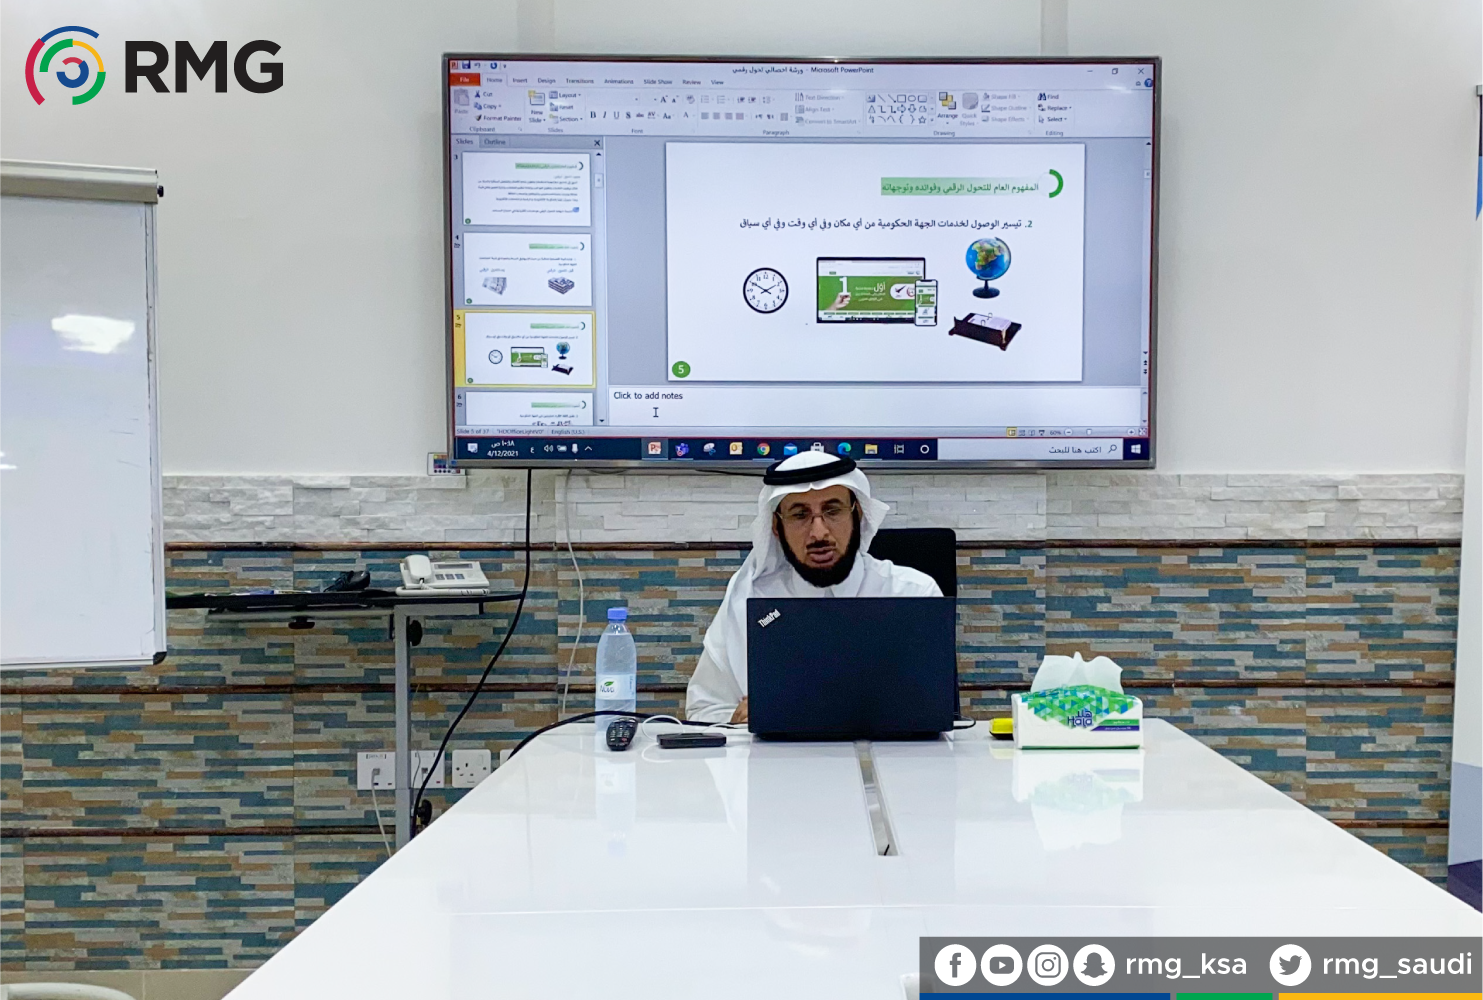 Dr. Abdul Rahman Al-Khadr while presenting the "digital transformation specialist" workshop to the staff of the Ministry of Economy and Planning